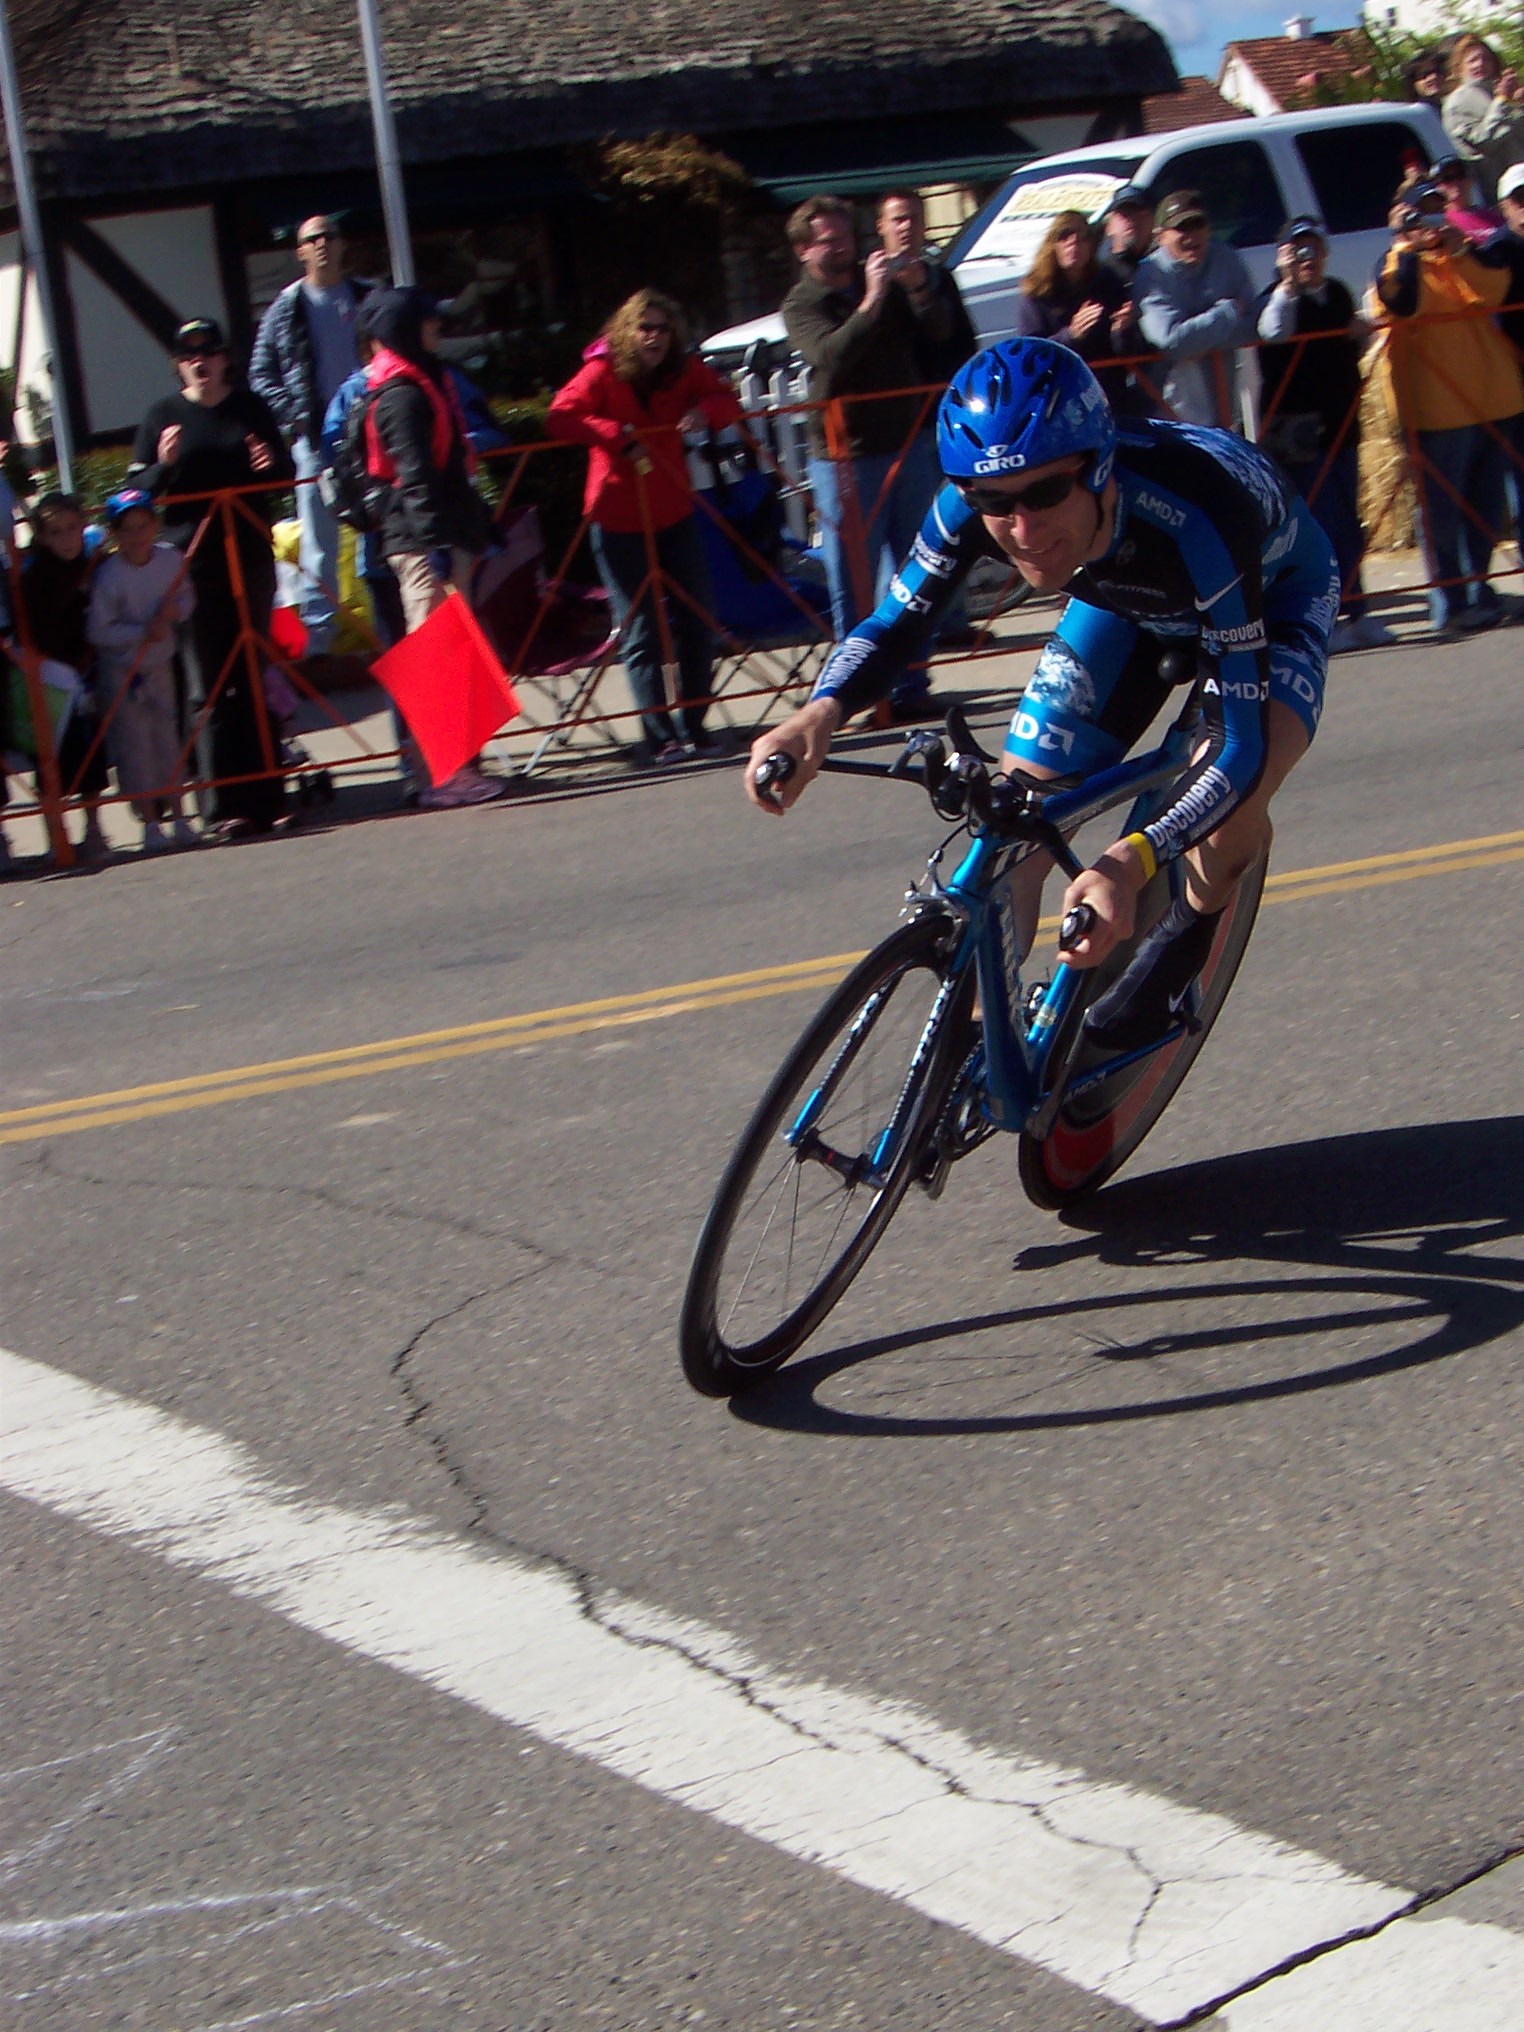 Levi Leipheimer went last, and won with a time of 29'40", 18 seconds ahead of second place.